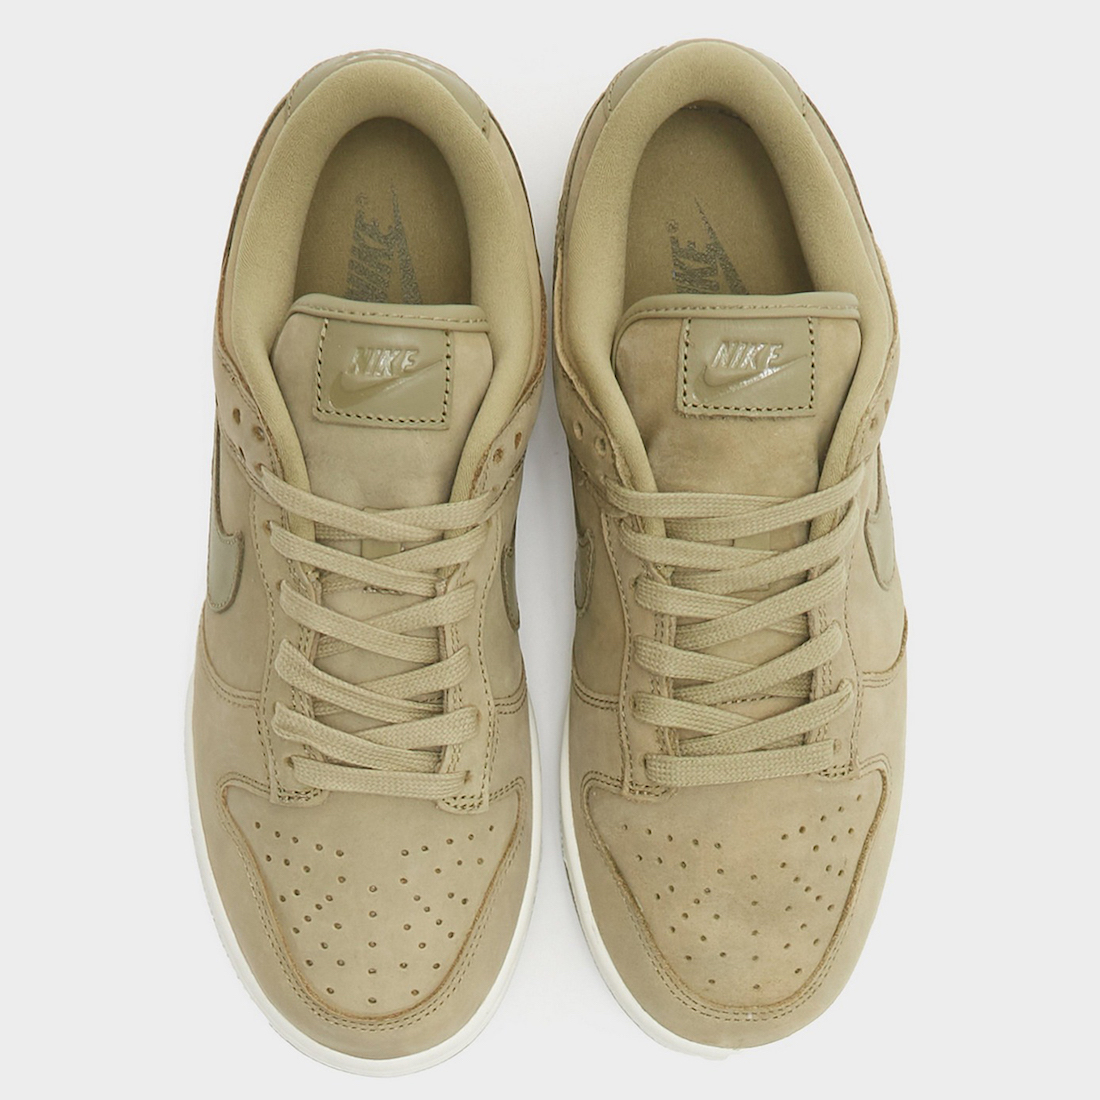 Nike Dunk Low Neutral Olive Sail DV7415 200 Release Date 2